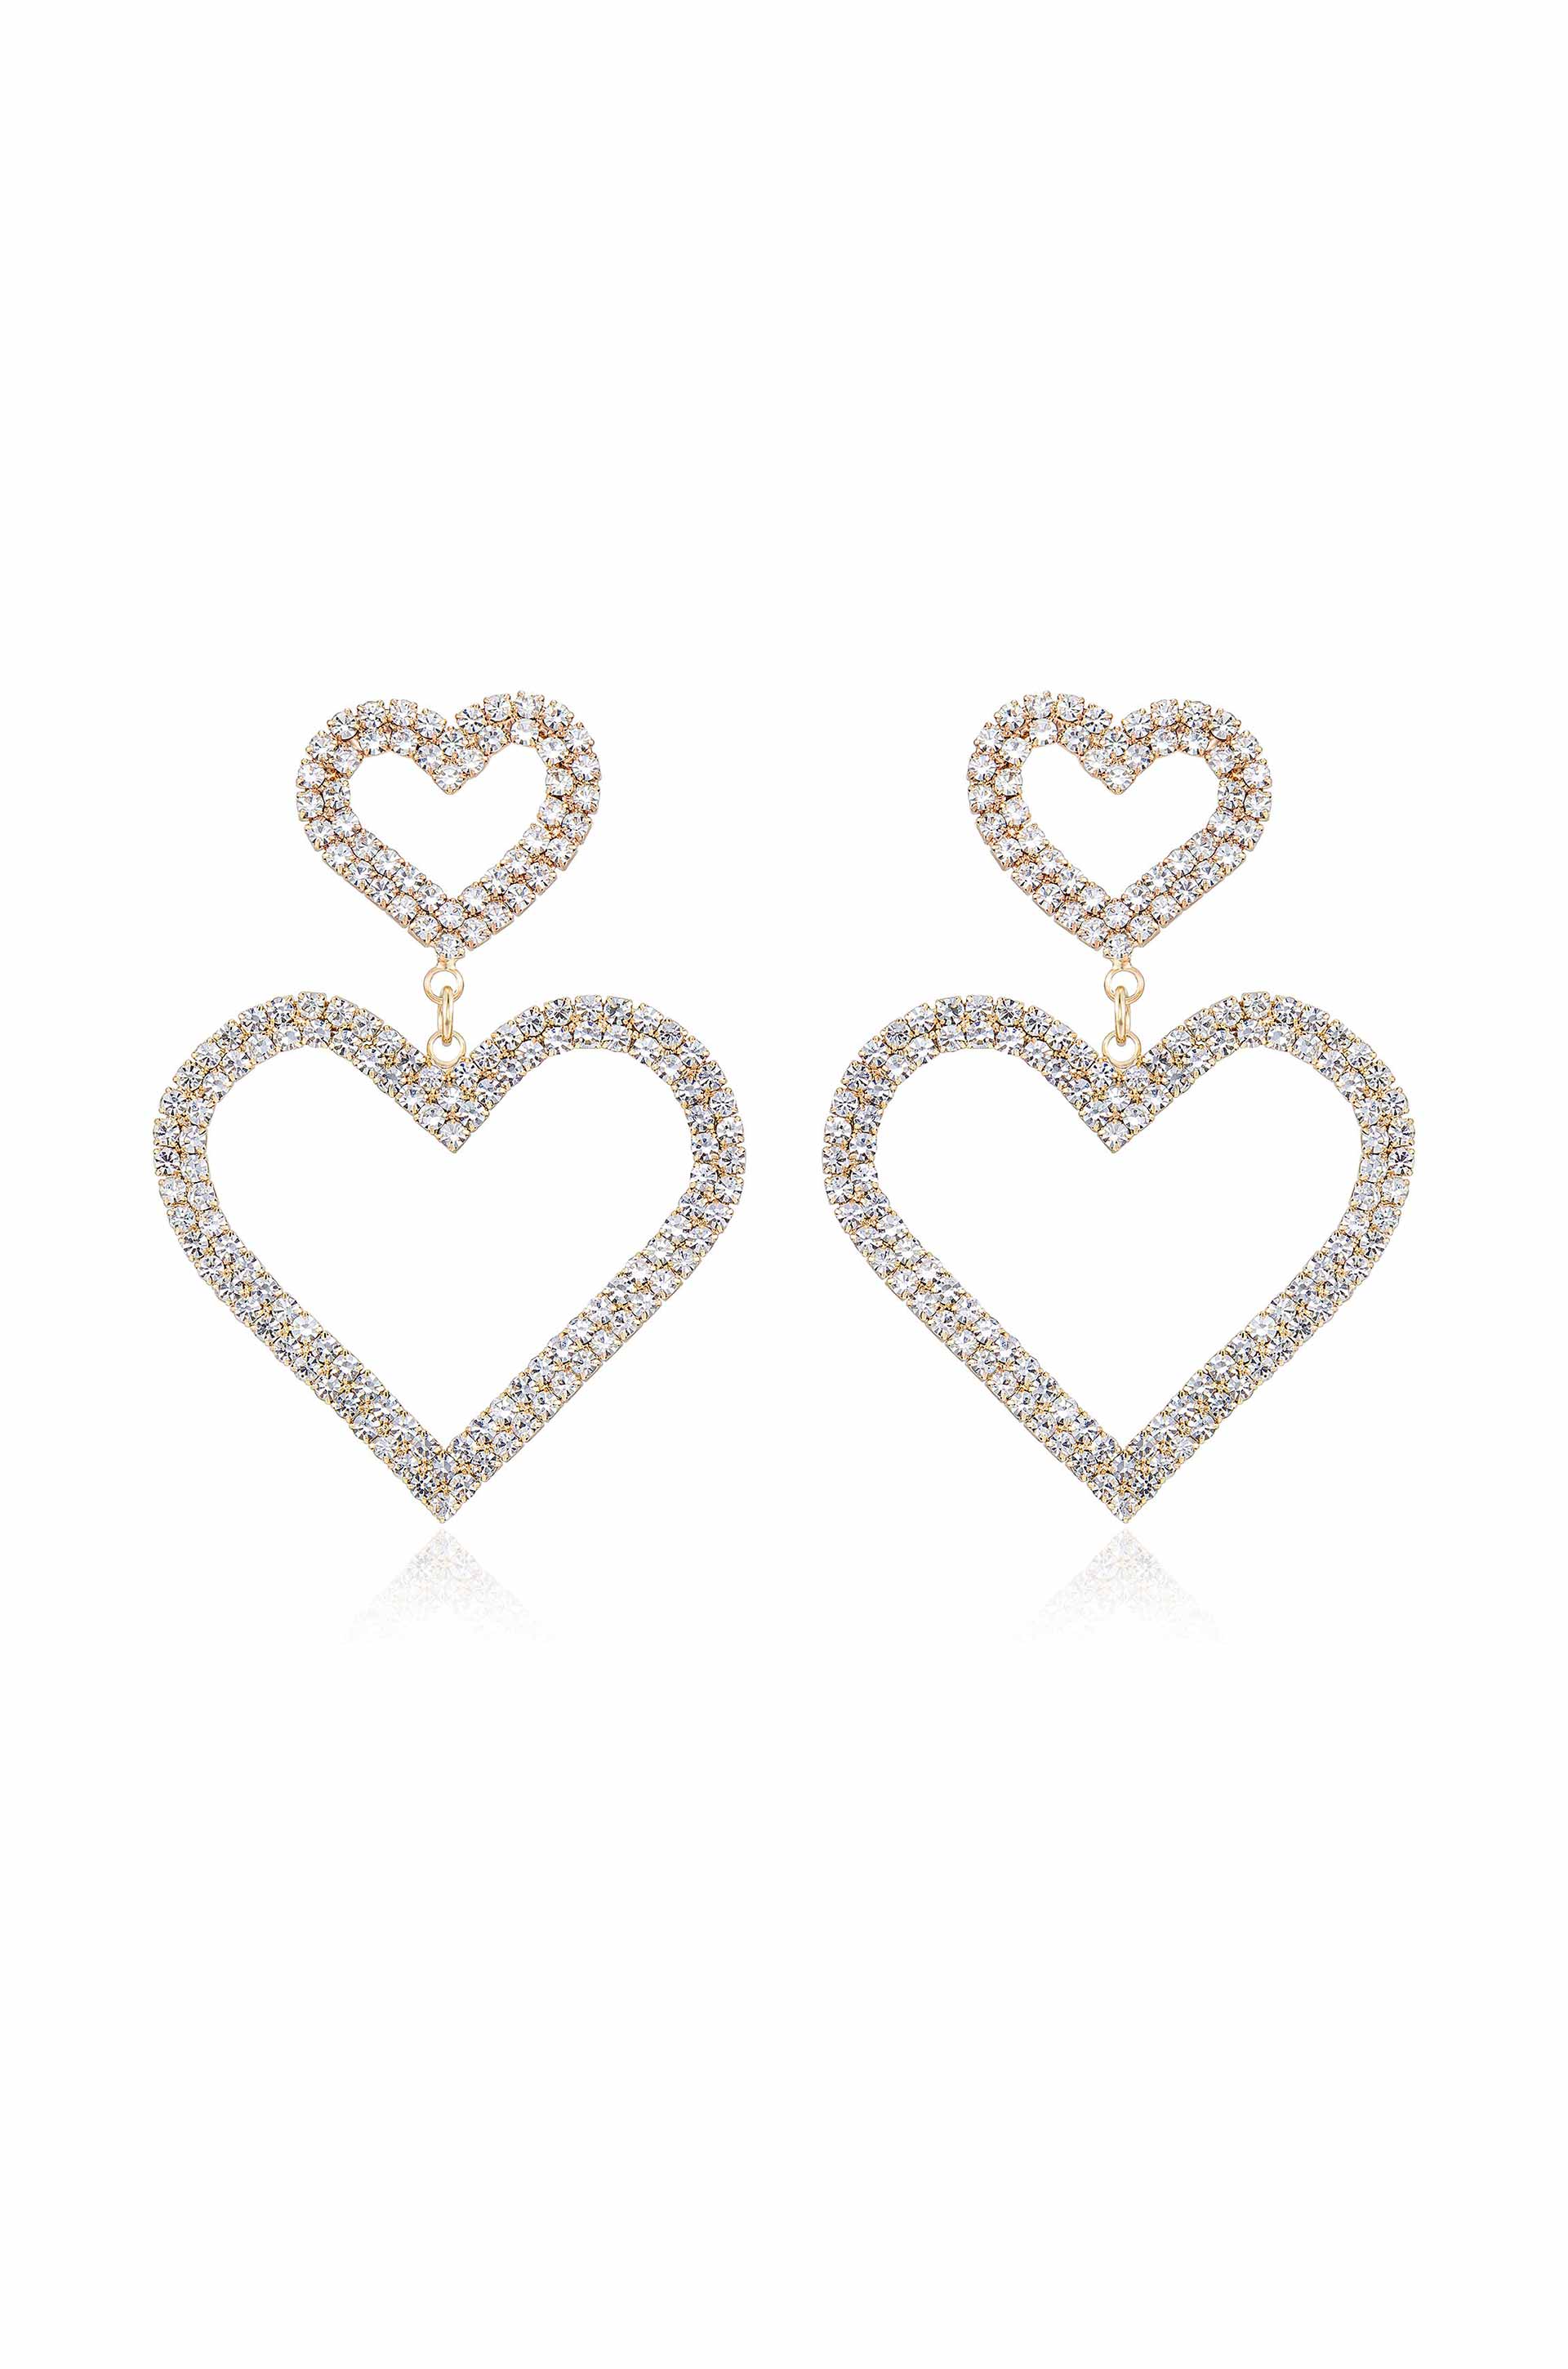 Double Trouble Heart Crystal 18k Gold Plated Earrings on white